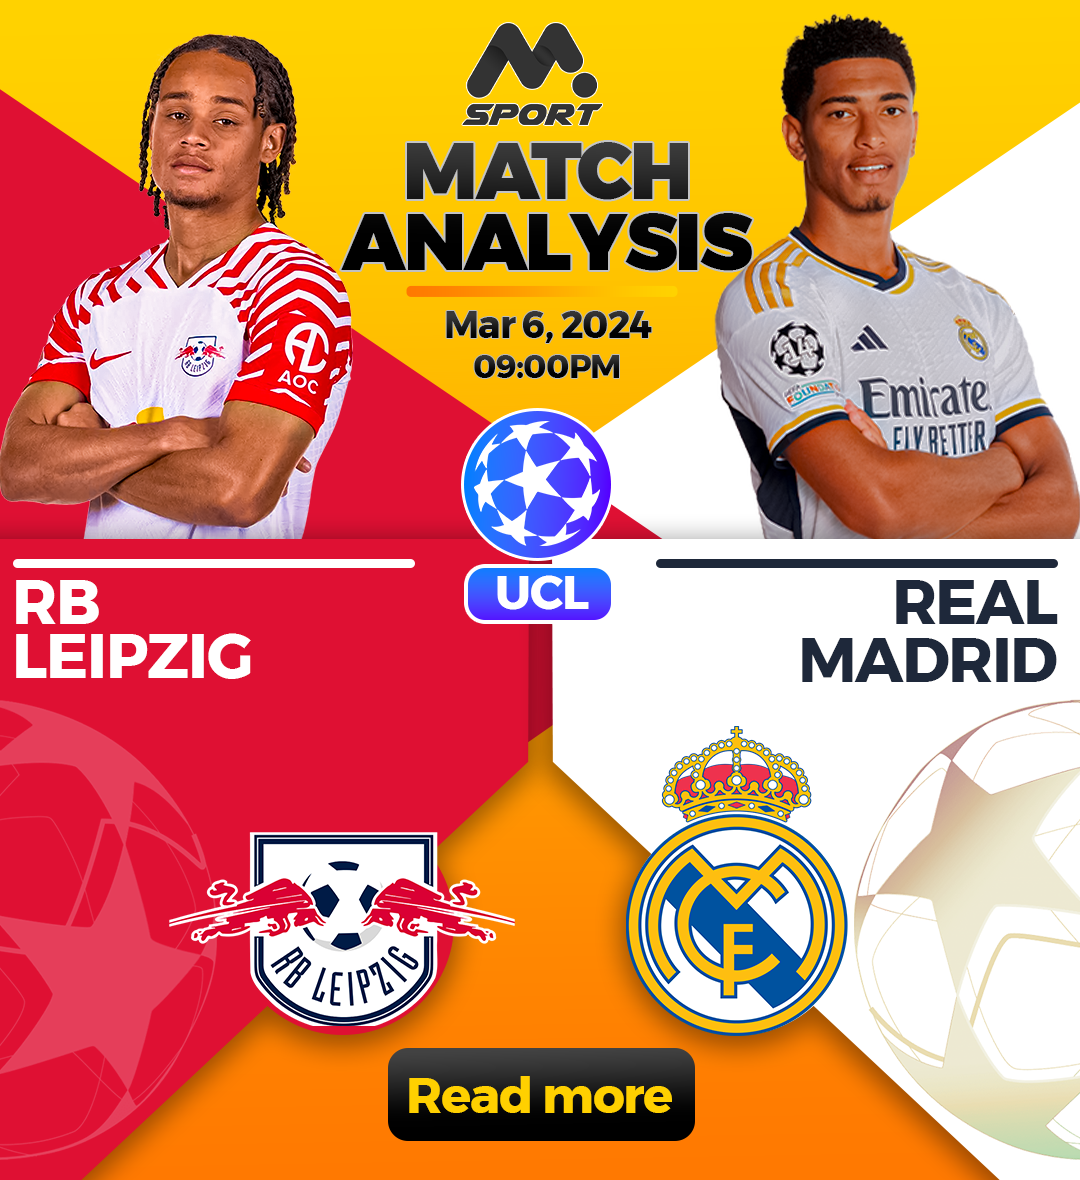 Real Madrid vs RB Leipzig: A Routine Quarter-Final Qualification for the UCL Royals or a Huge Upset